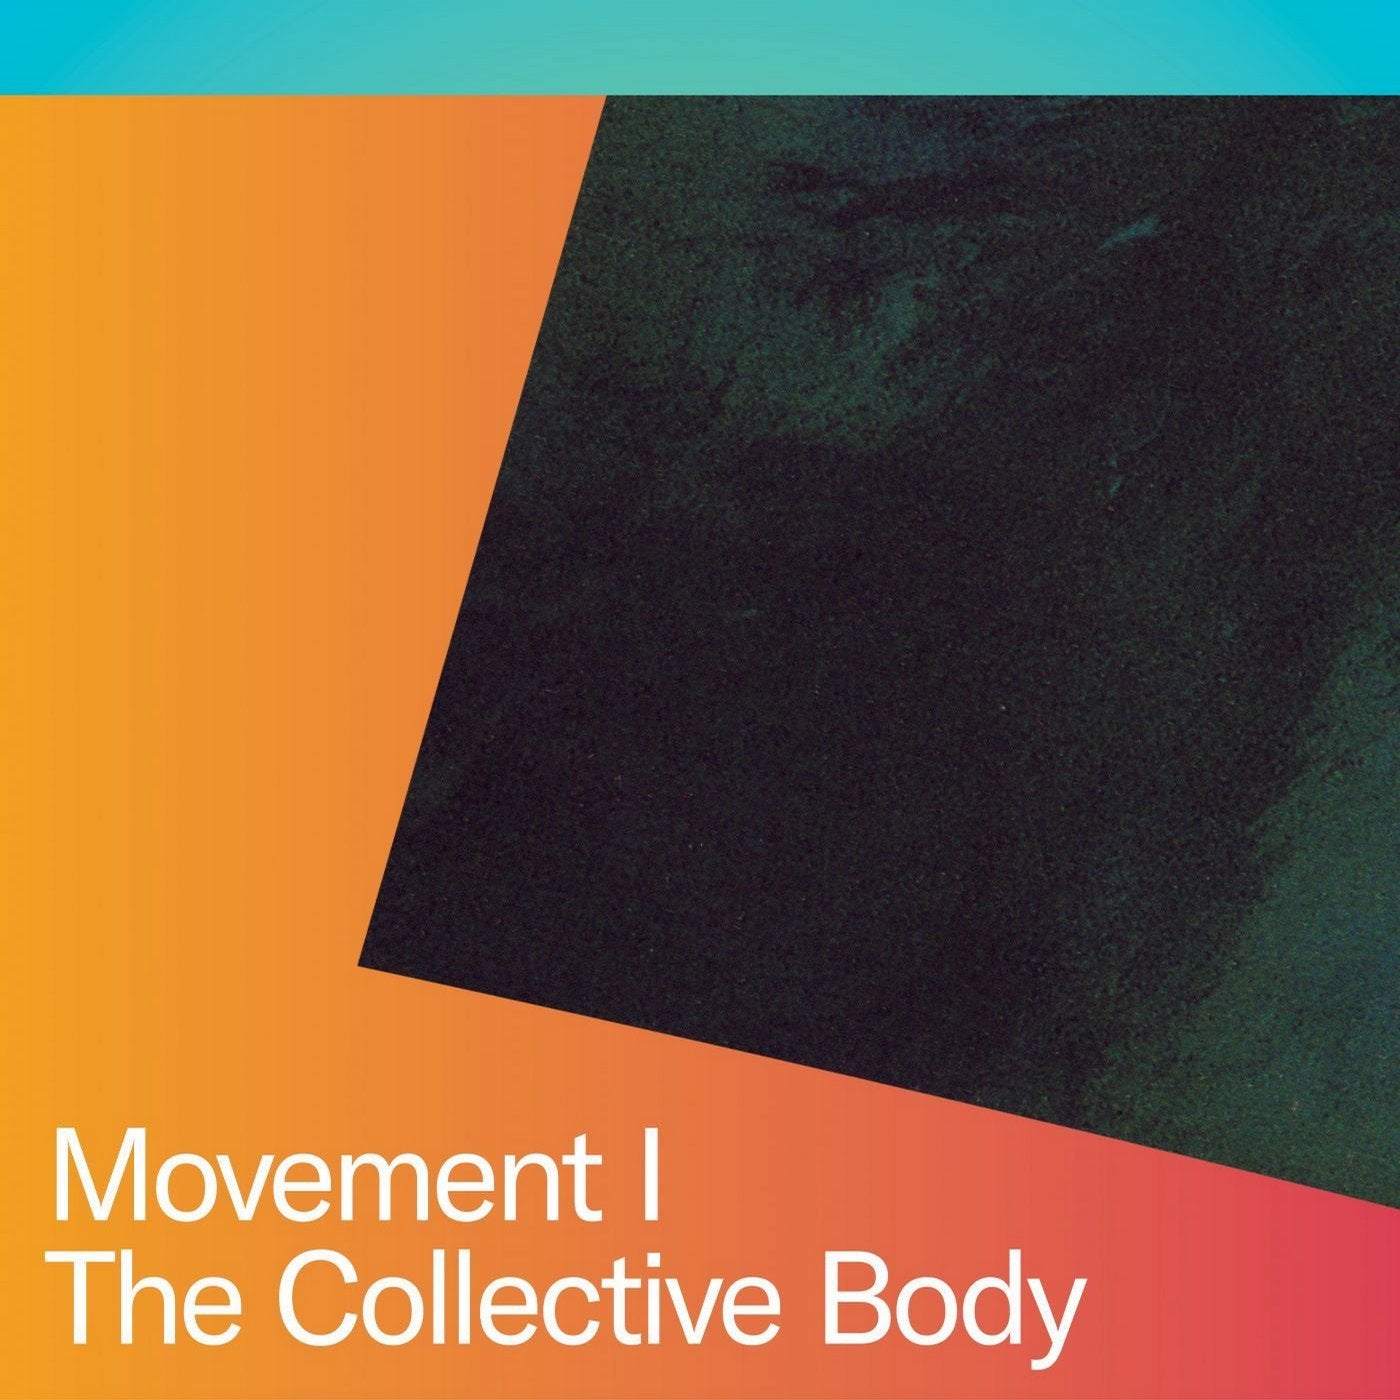 The Collective Body